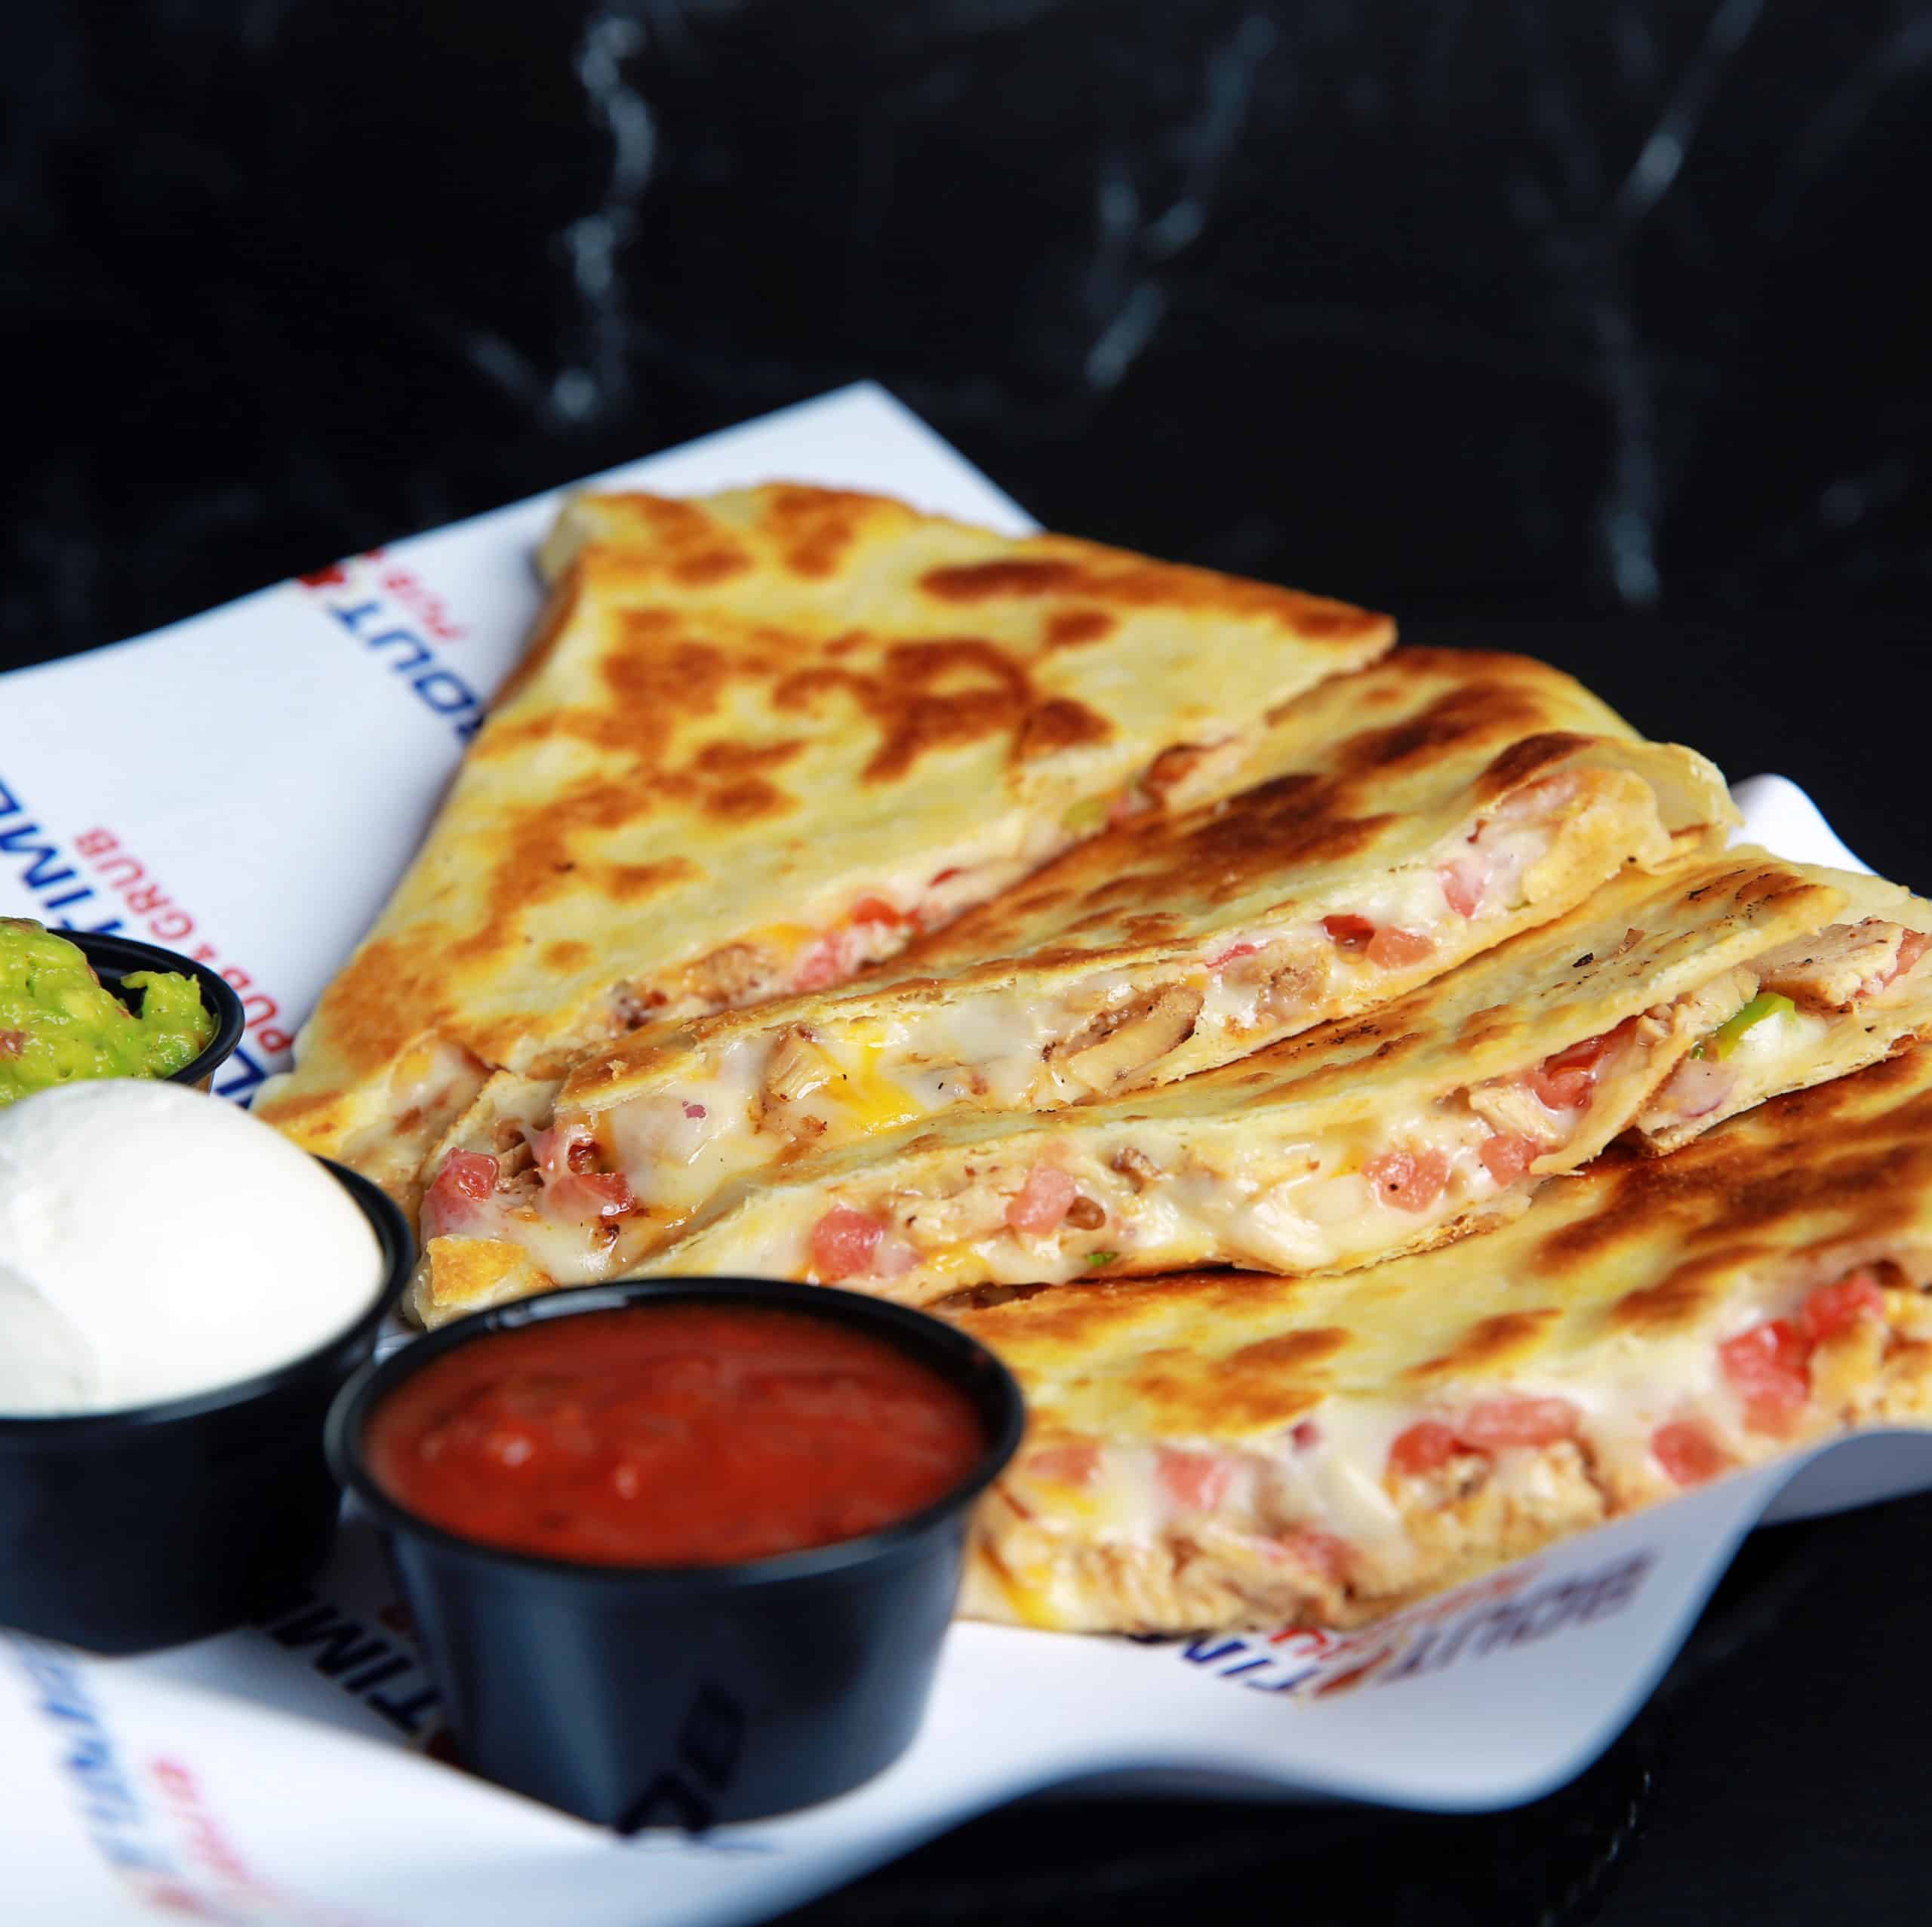 A flour tortilla stuffed with cheese and Pico de Gallo. Griddled to a golden brown and served with sour cream, salsa and fresh guacamole. Choose either chicken or steak.